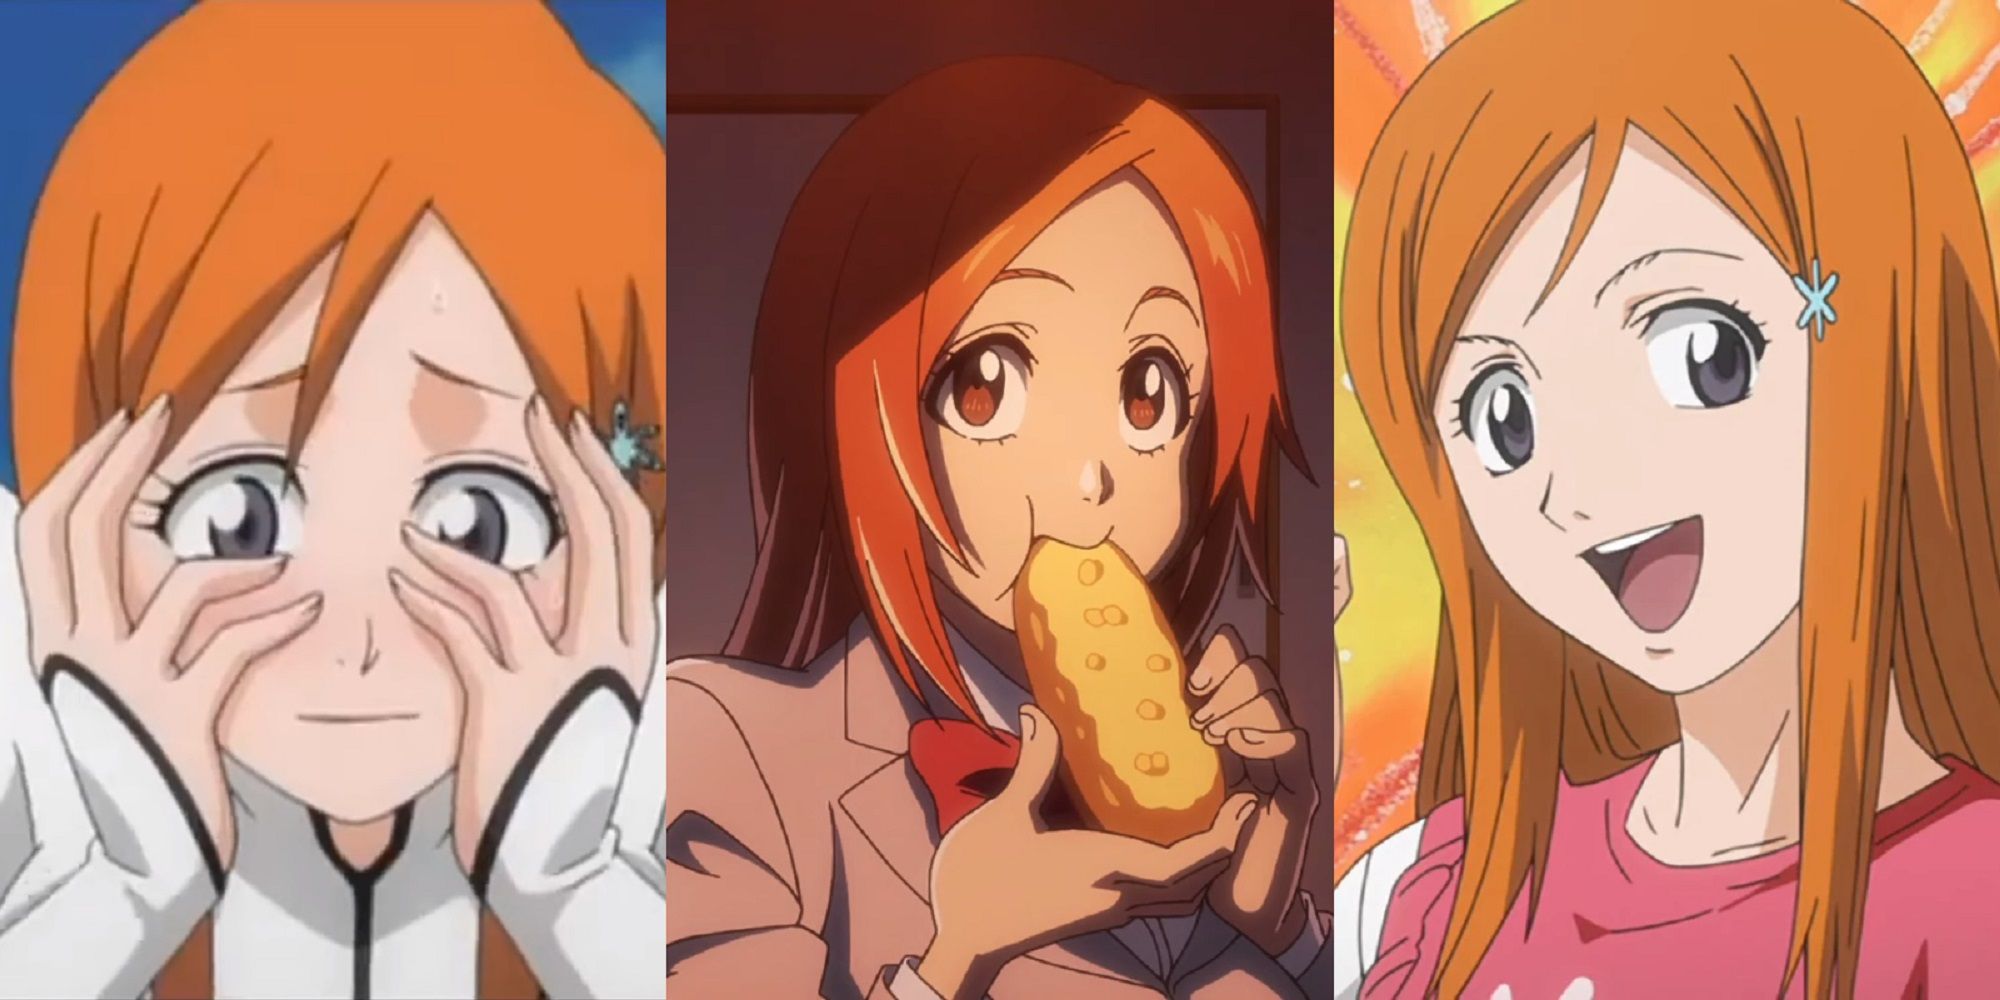 Split image of Orihime blushing as she is being carried by Ichigo, eating bread, and determined to do her best in the Bleach anime